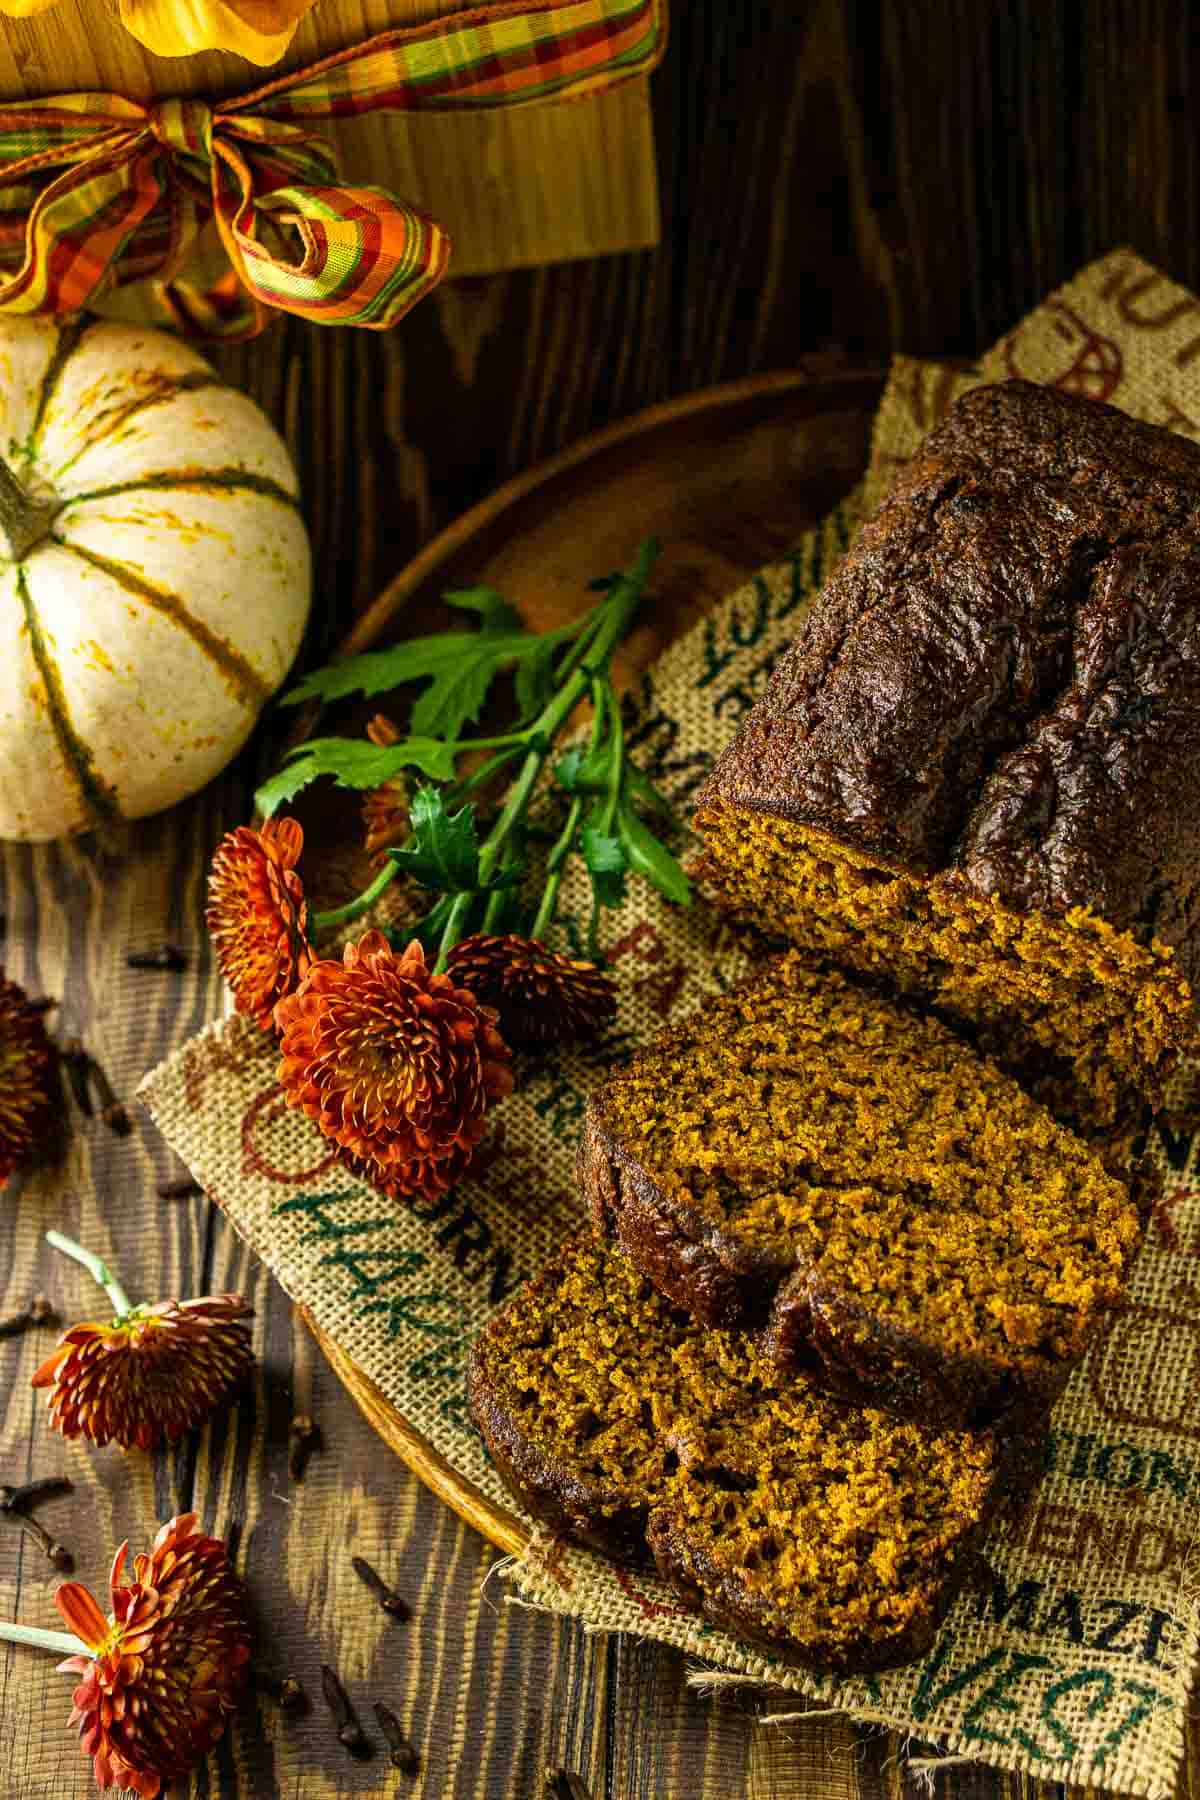 The pumpkin gingerbread loaf cut into slices with fall decor around it.